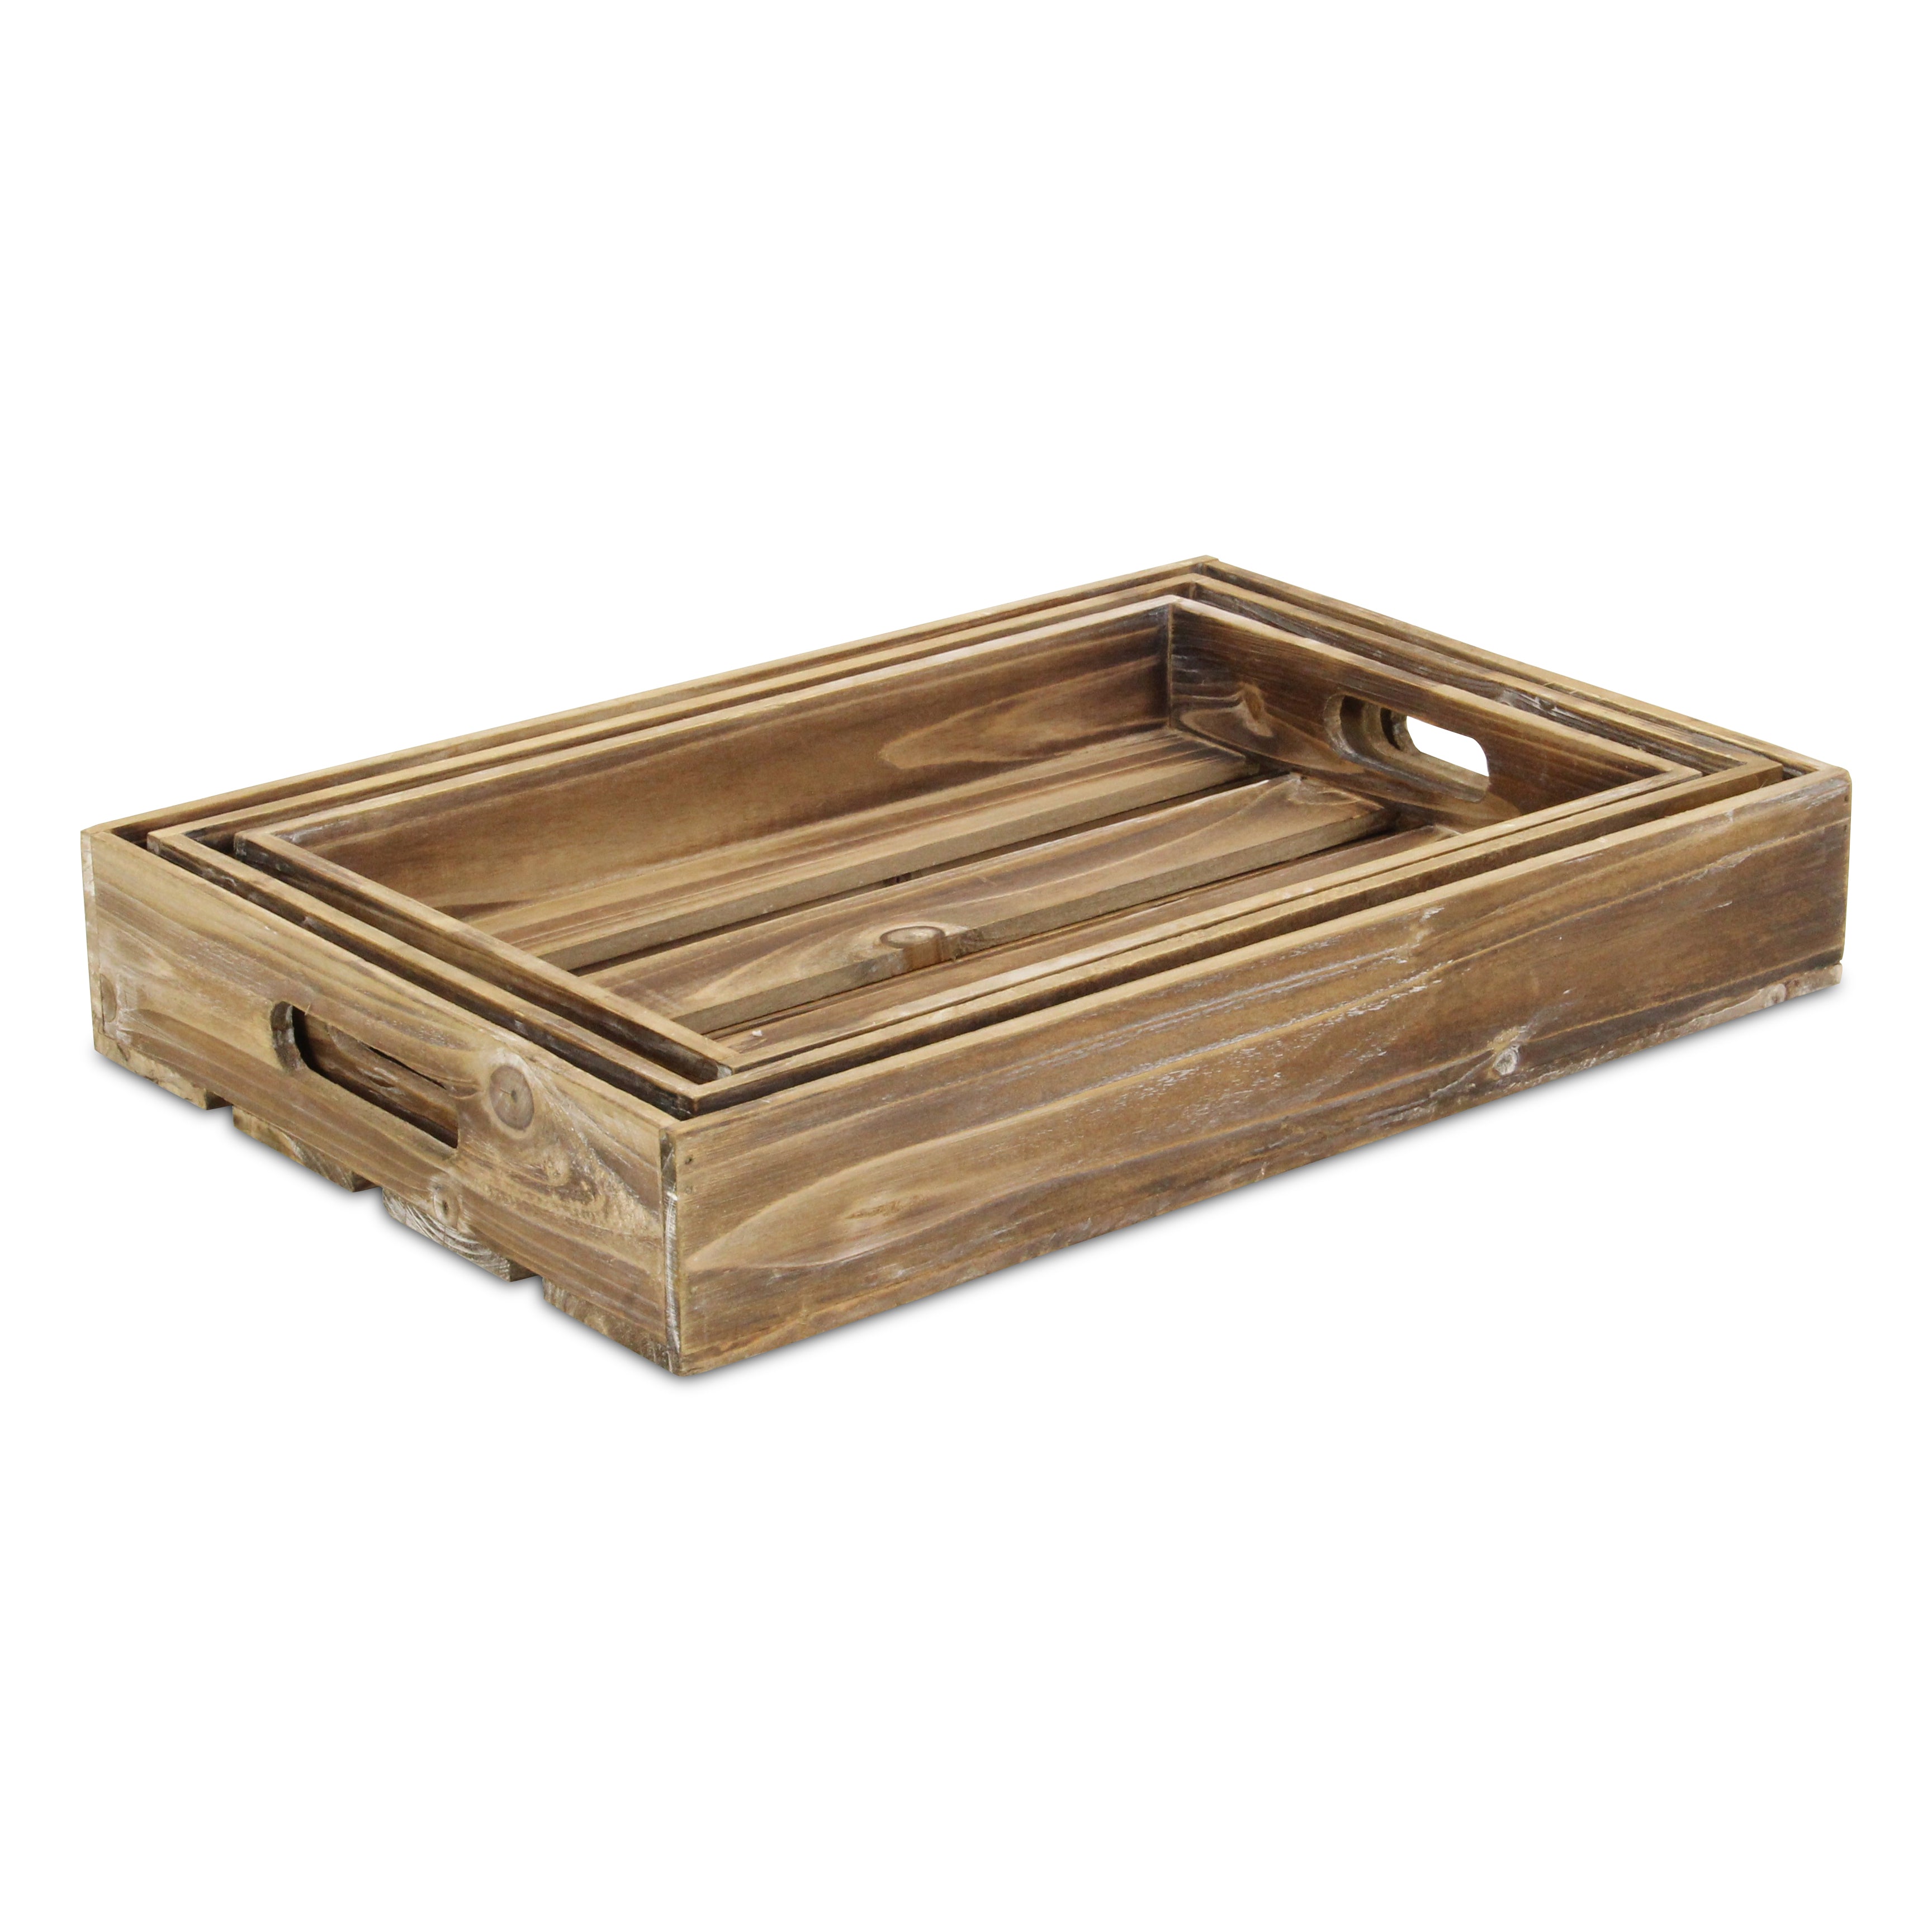 Nora Set of 3 Slatted Wood Trays - Brown